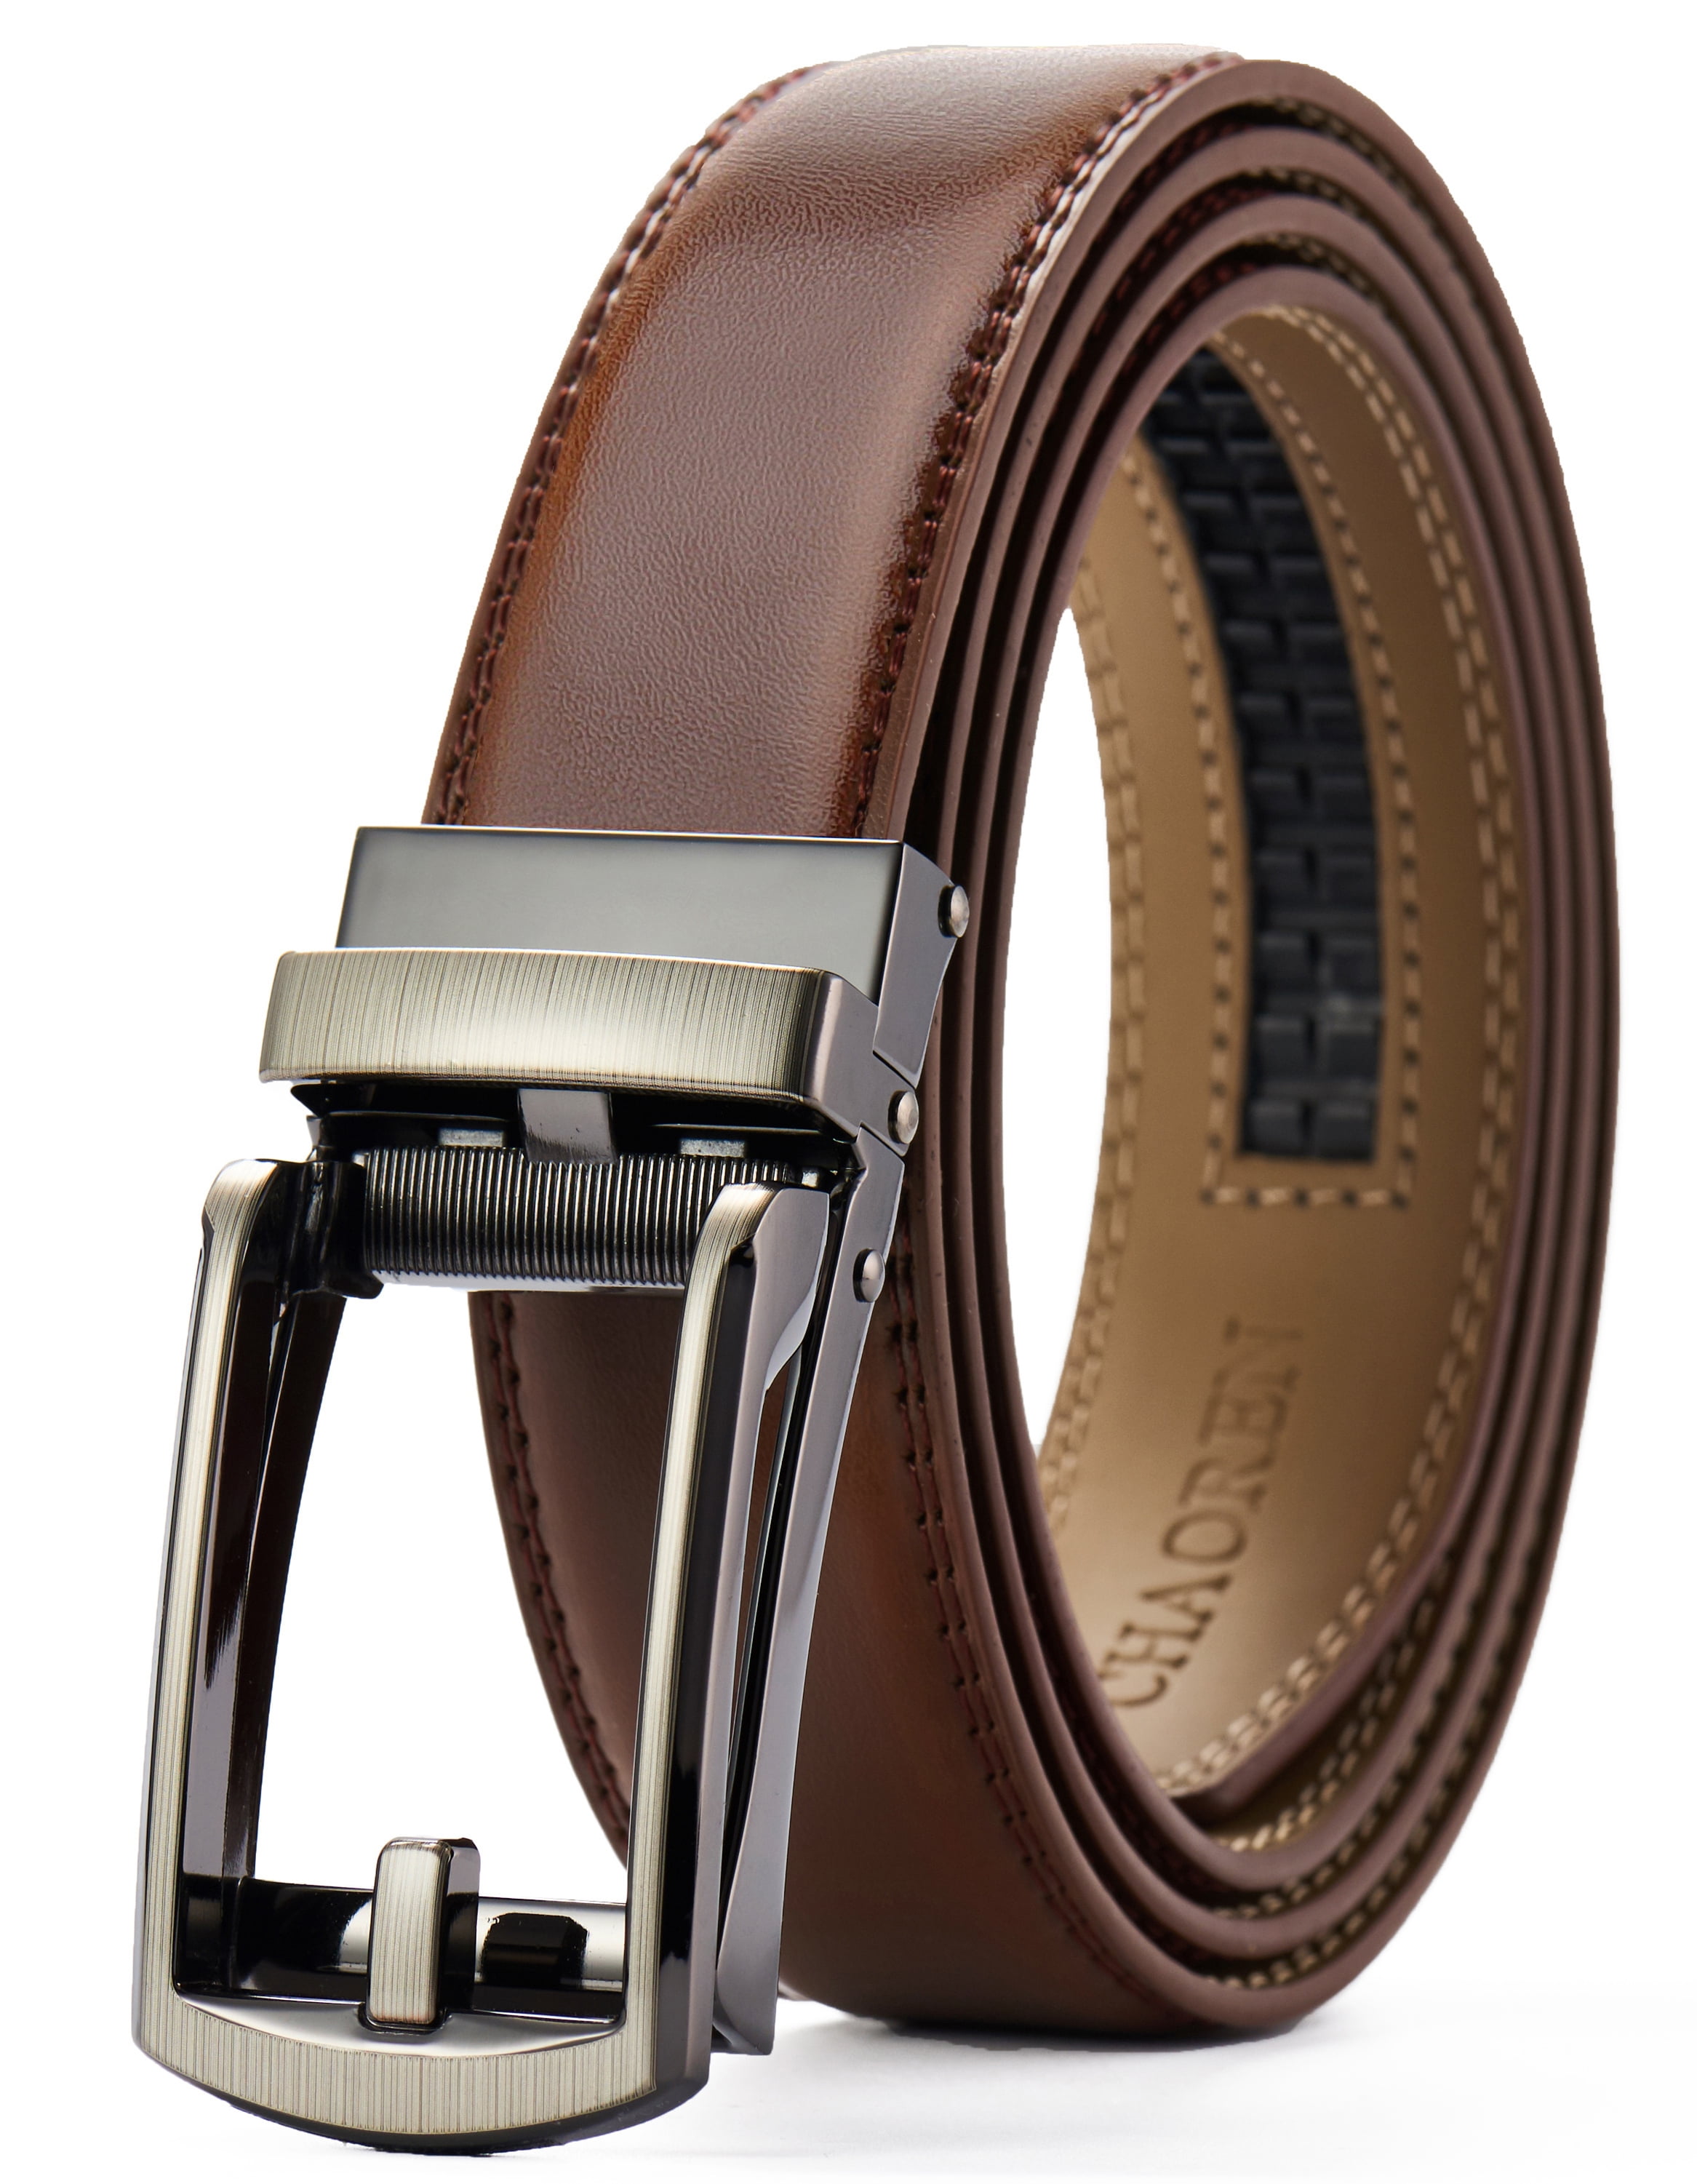 CHAOREN Leather Ratchet Belt Gift Set 1 3/8 Mens Belt Dress with Automatic Buckle Adjustable Trim to Fit 